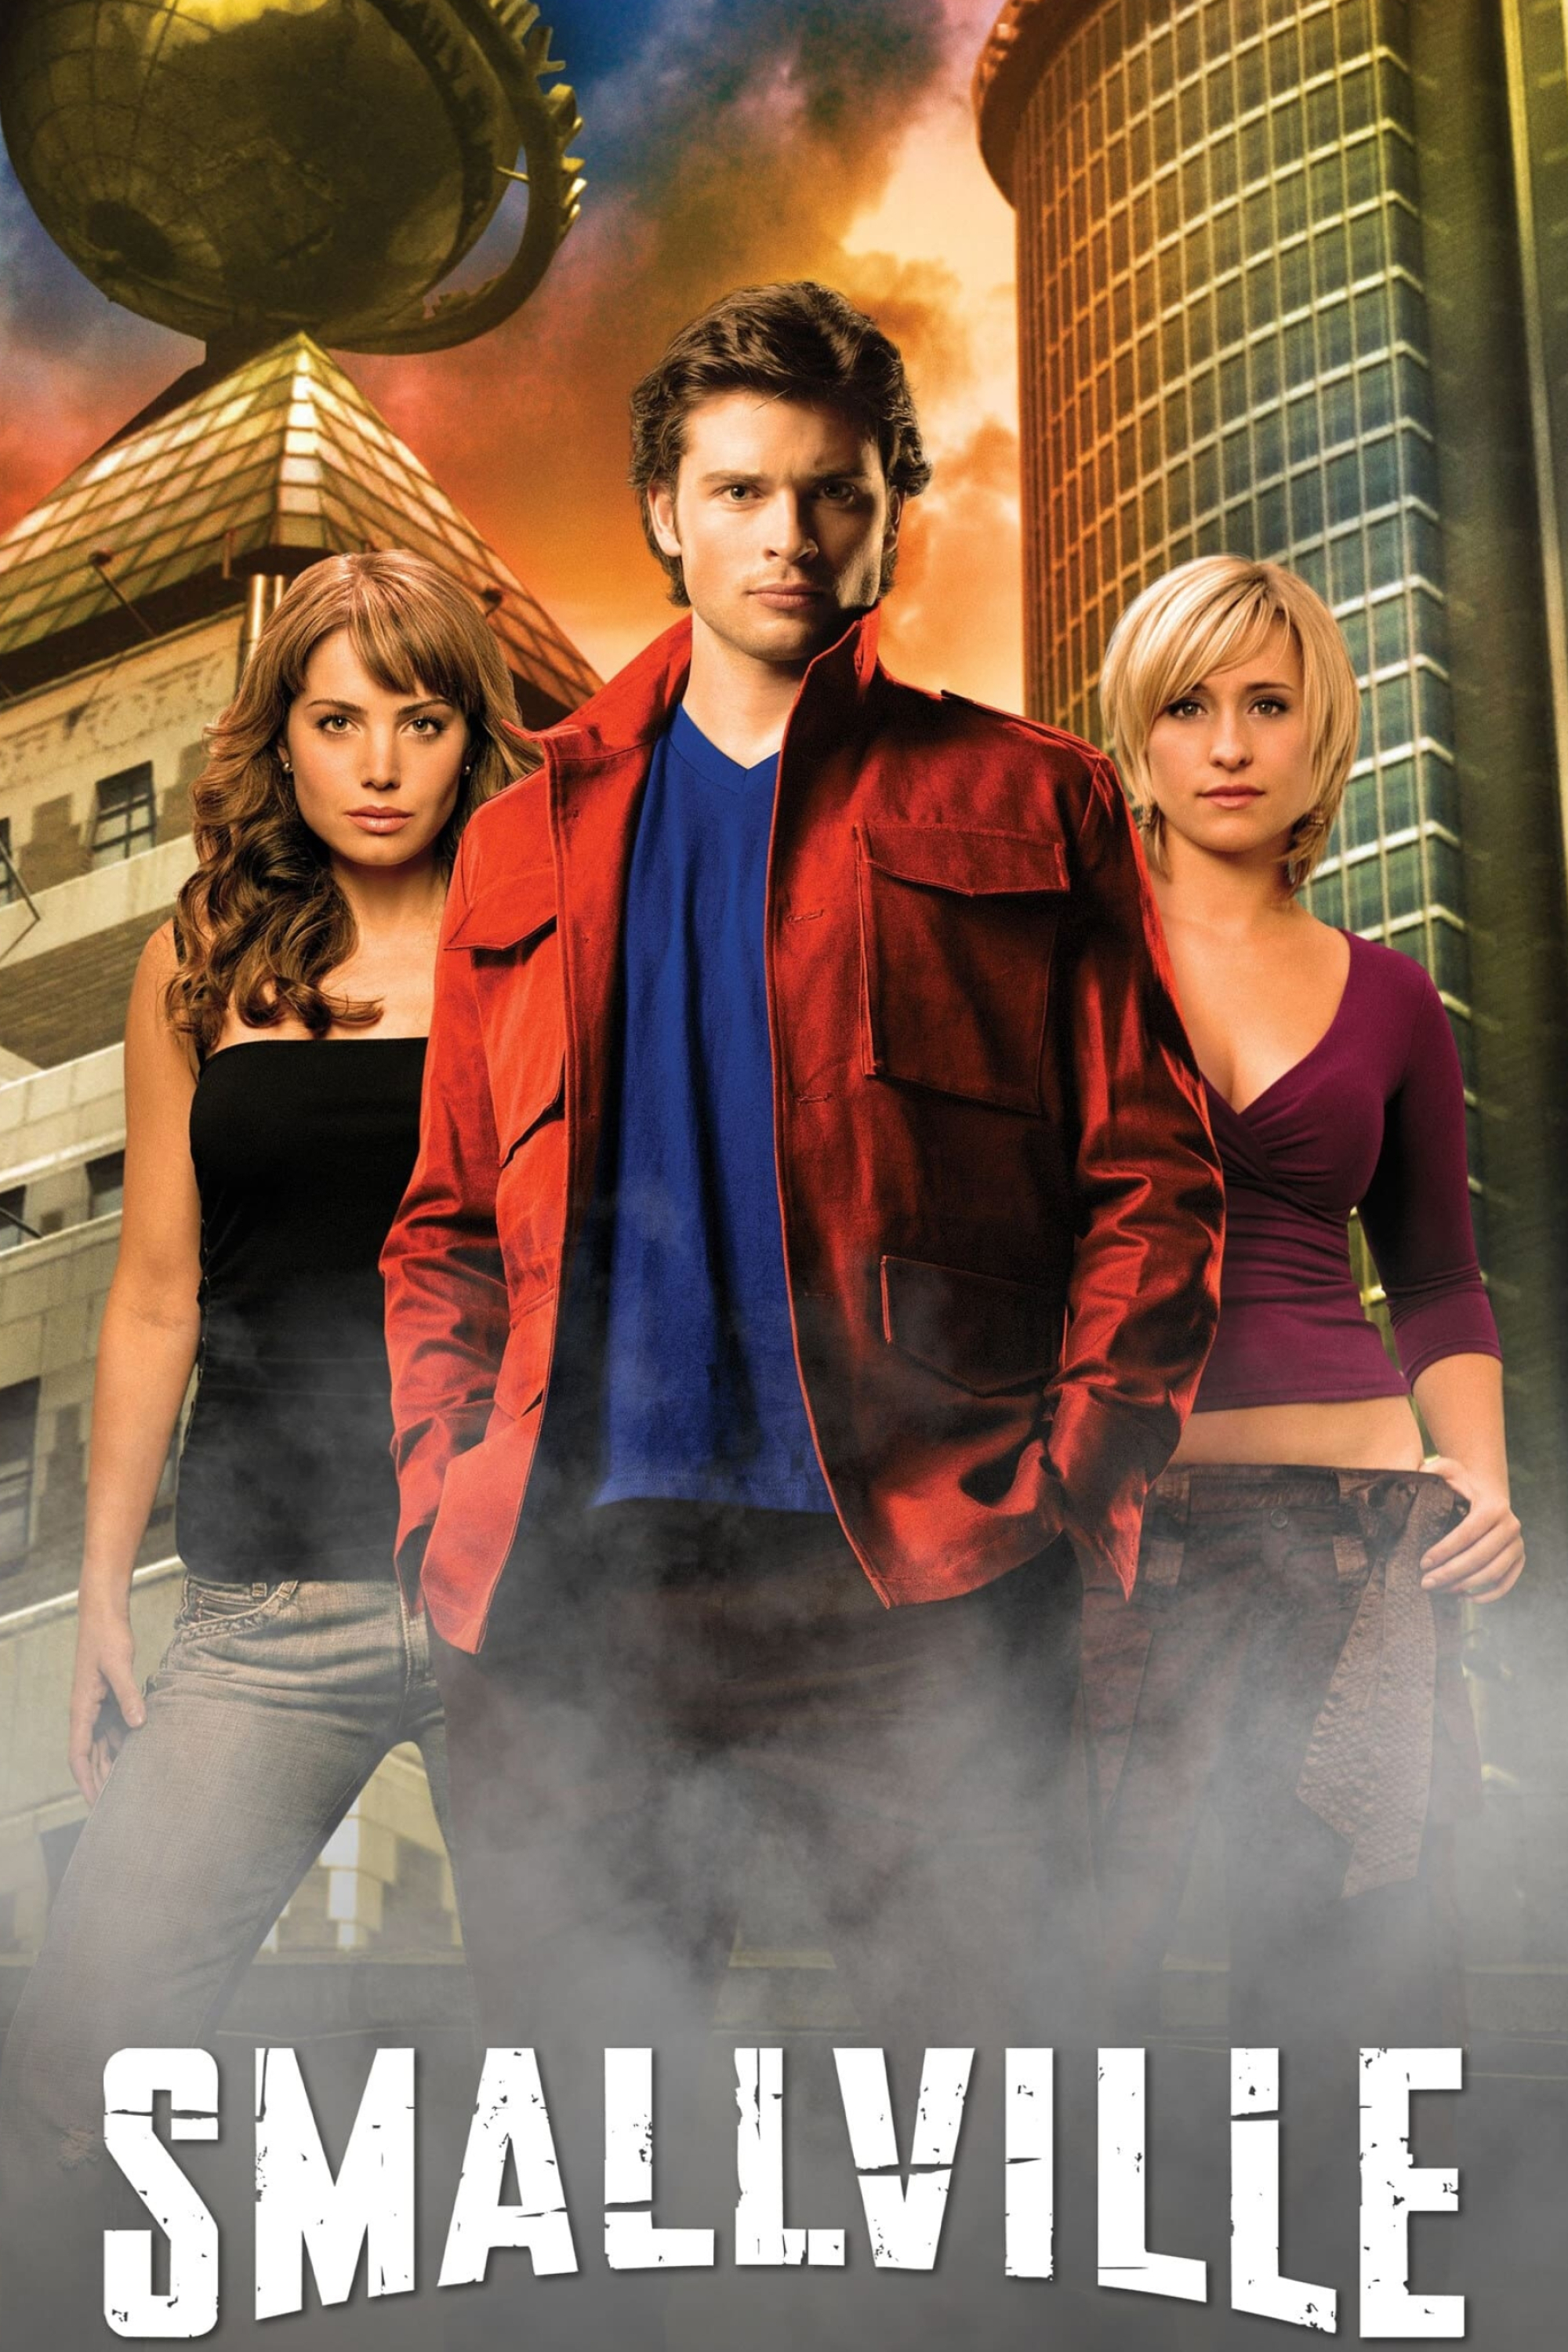 Smallville (TV Series): The adventures of a young Clark Kent, WB Television Network, 2001-2011. 2000x3000 HD Wallpaper.